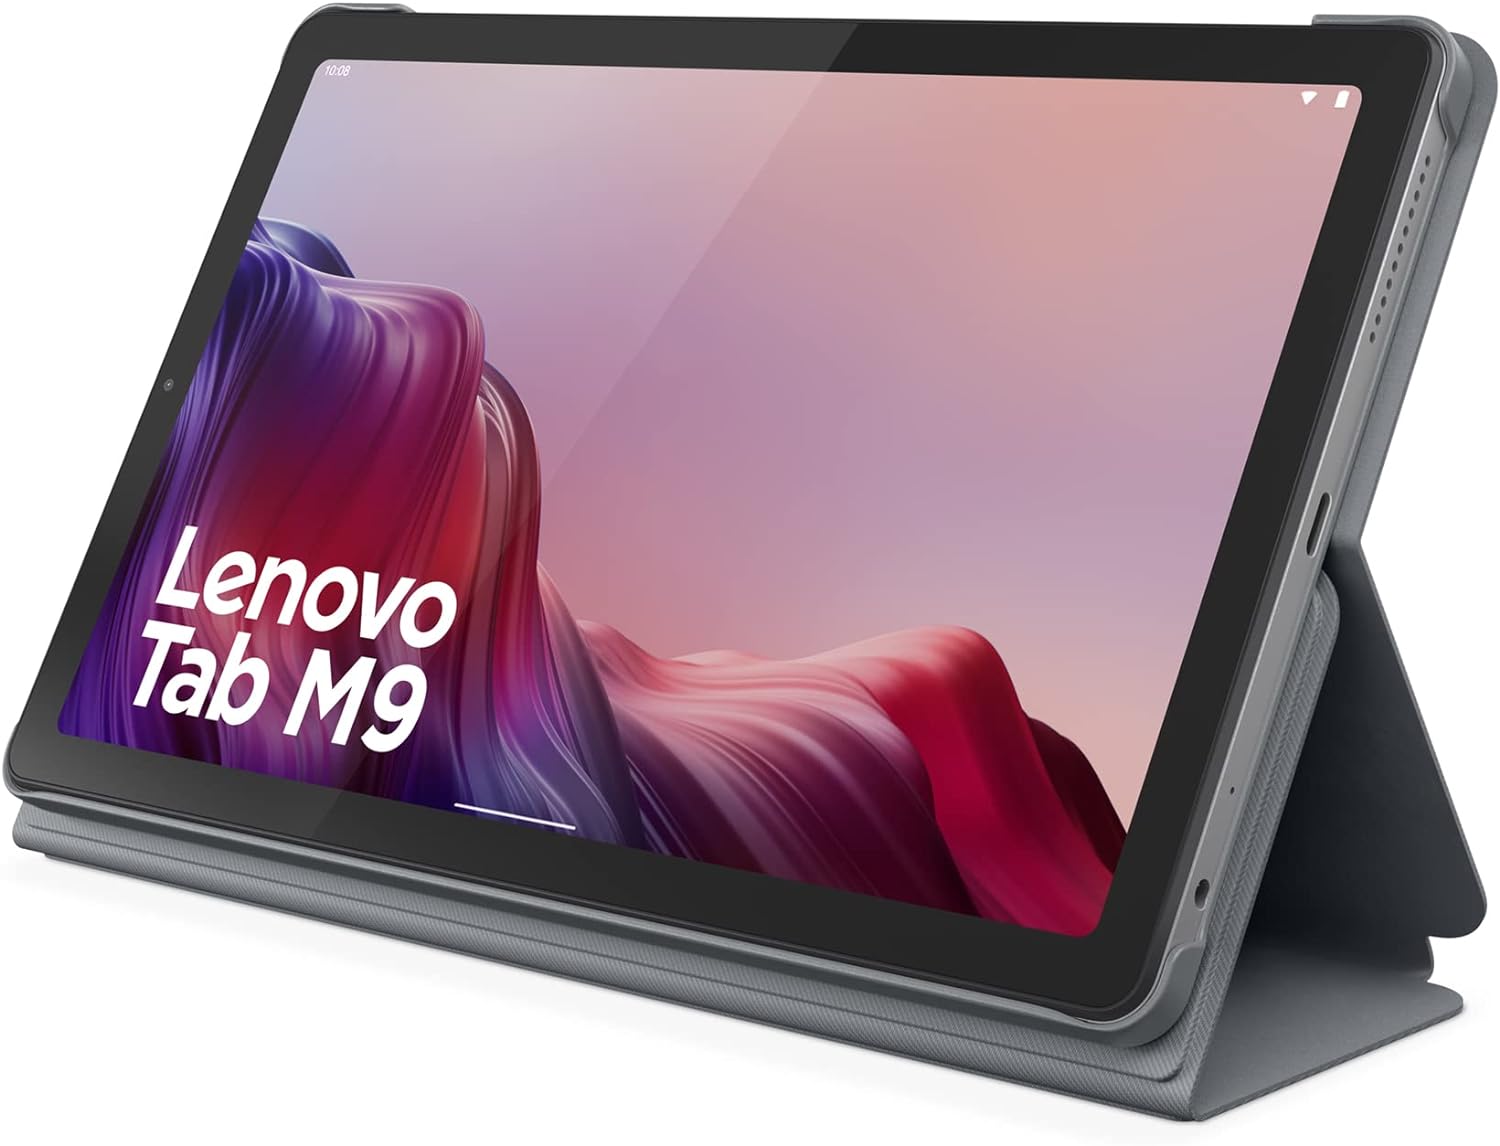 Lenovo Tab M9 Review: Budget-Friendly Tablet with Impressive Features